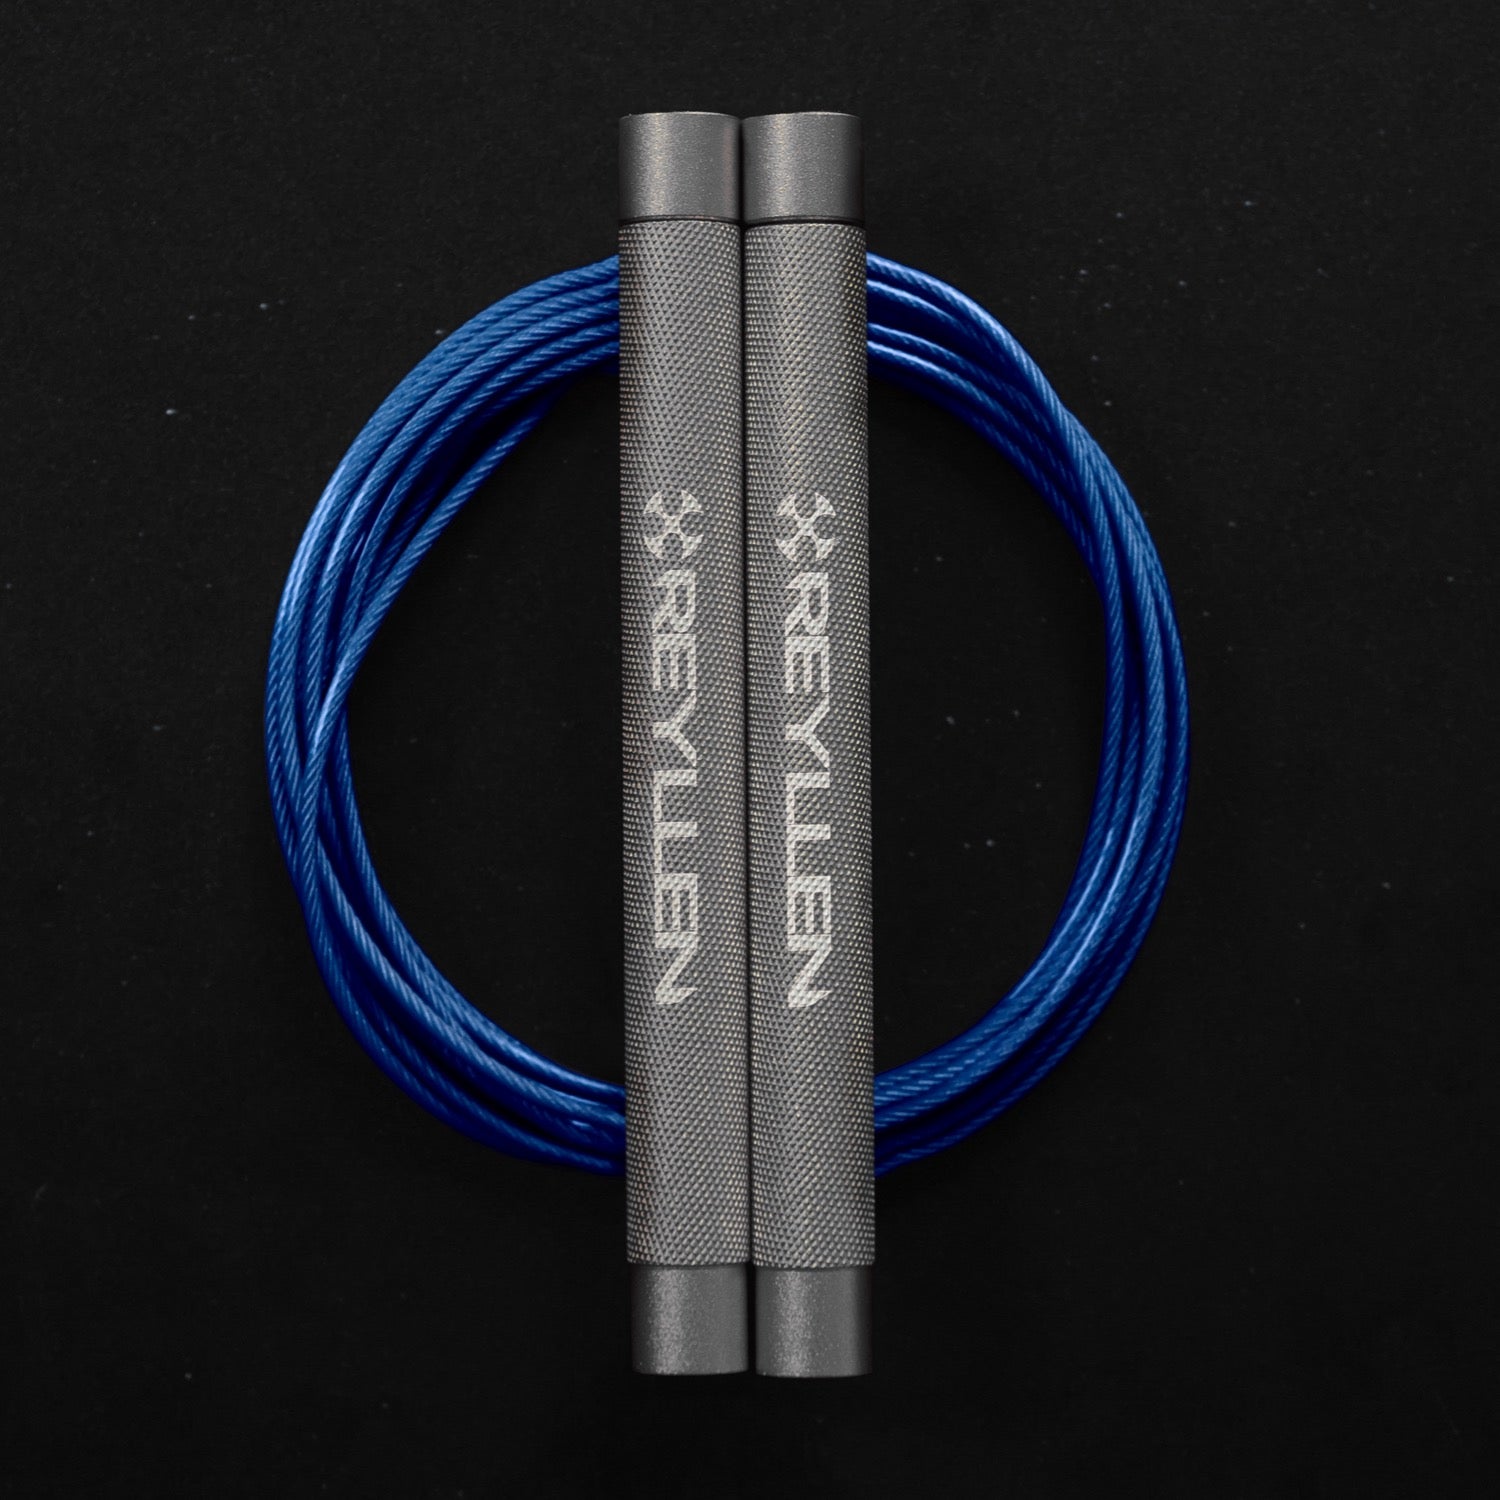 Reyllen Flare Mx Speed Skipping Jump Rope - Aluminium Handles - silver with blue pvc cable